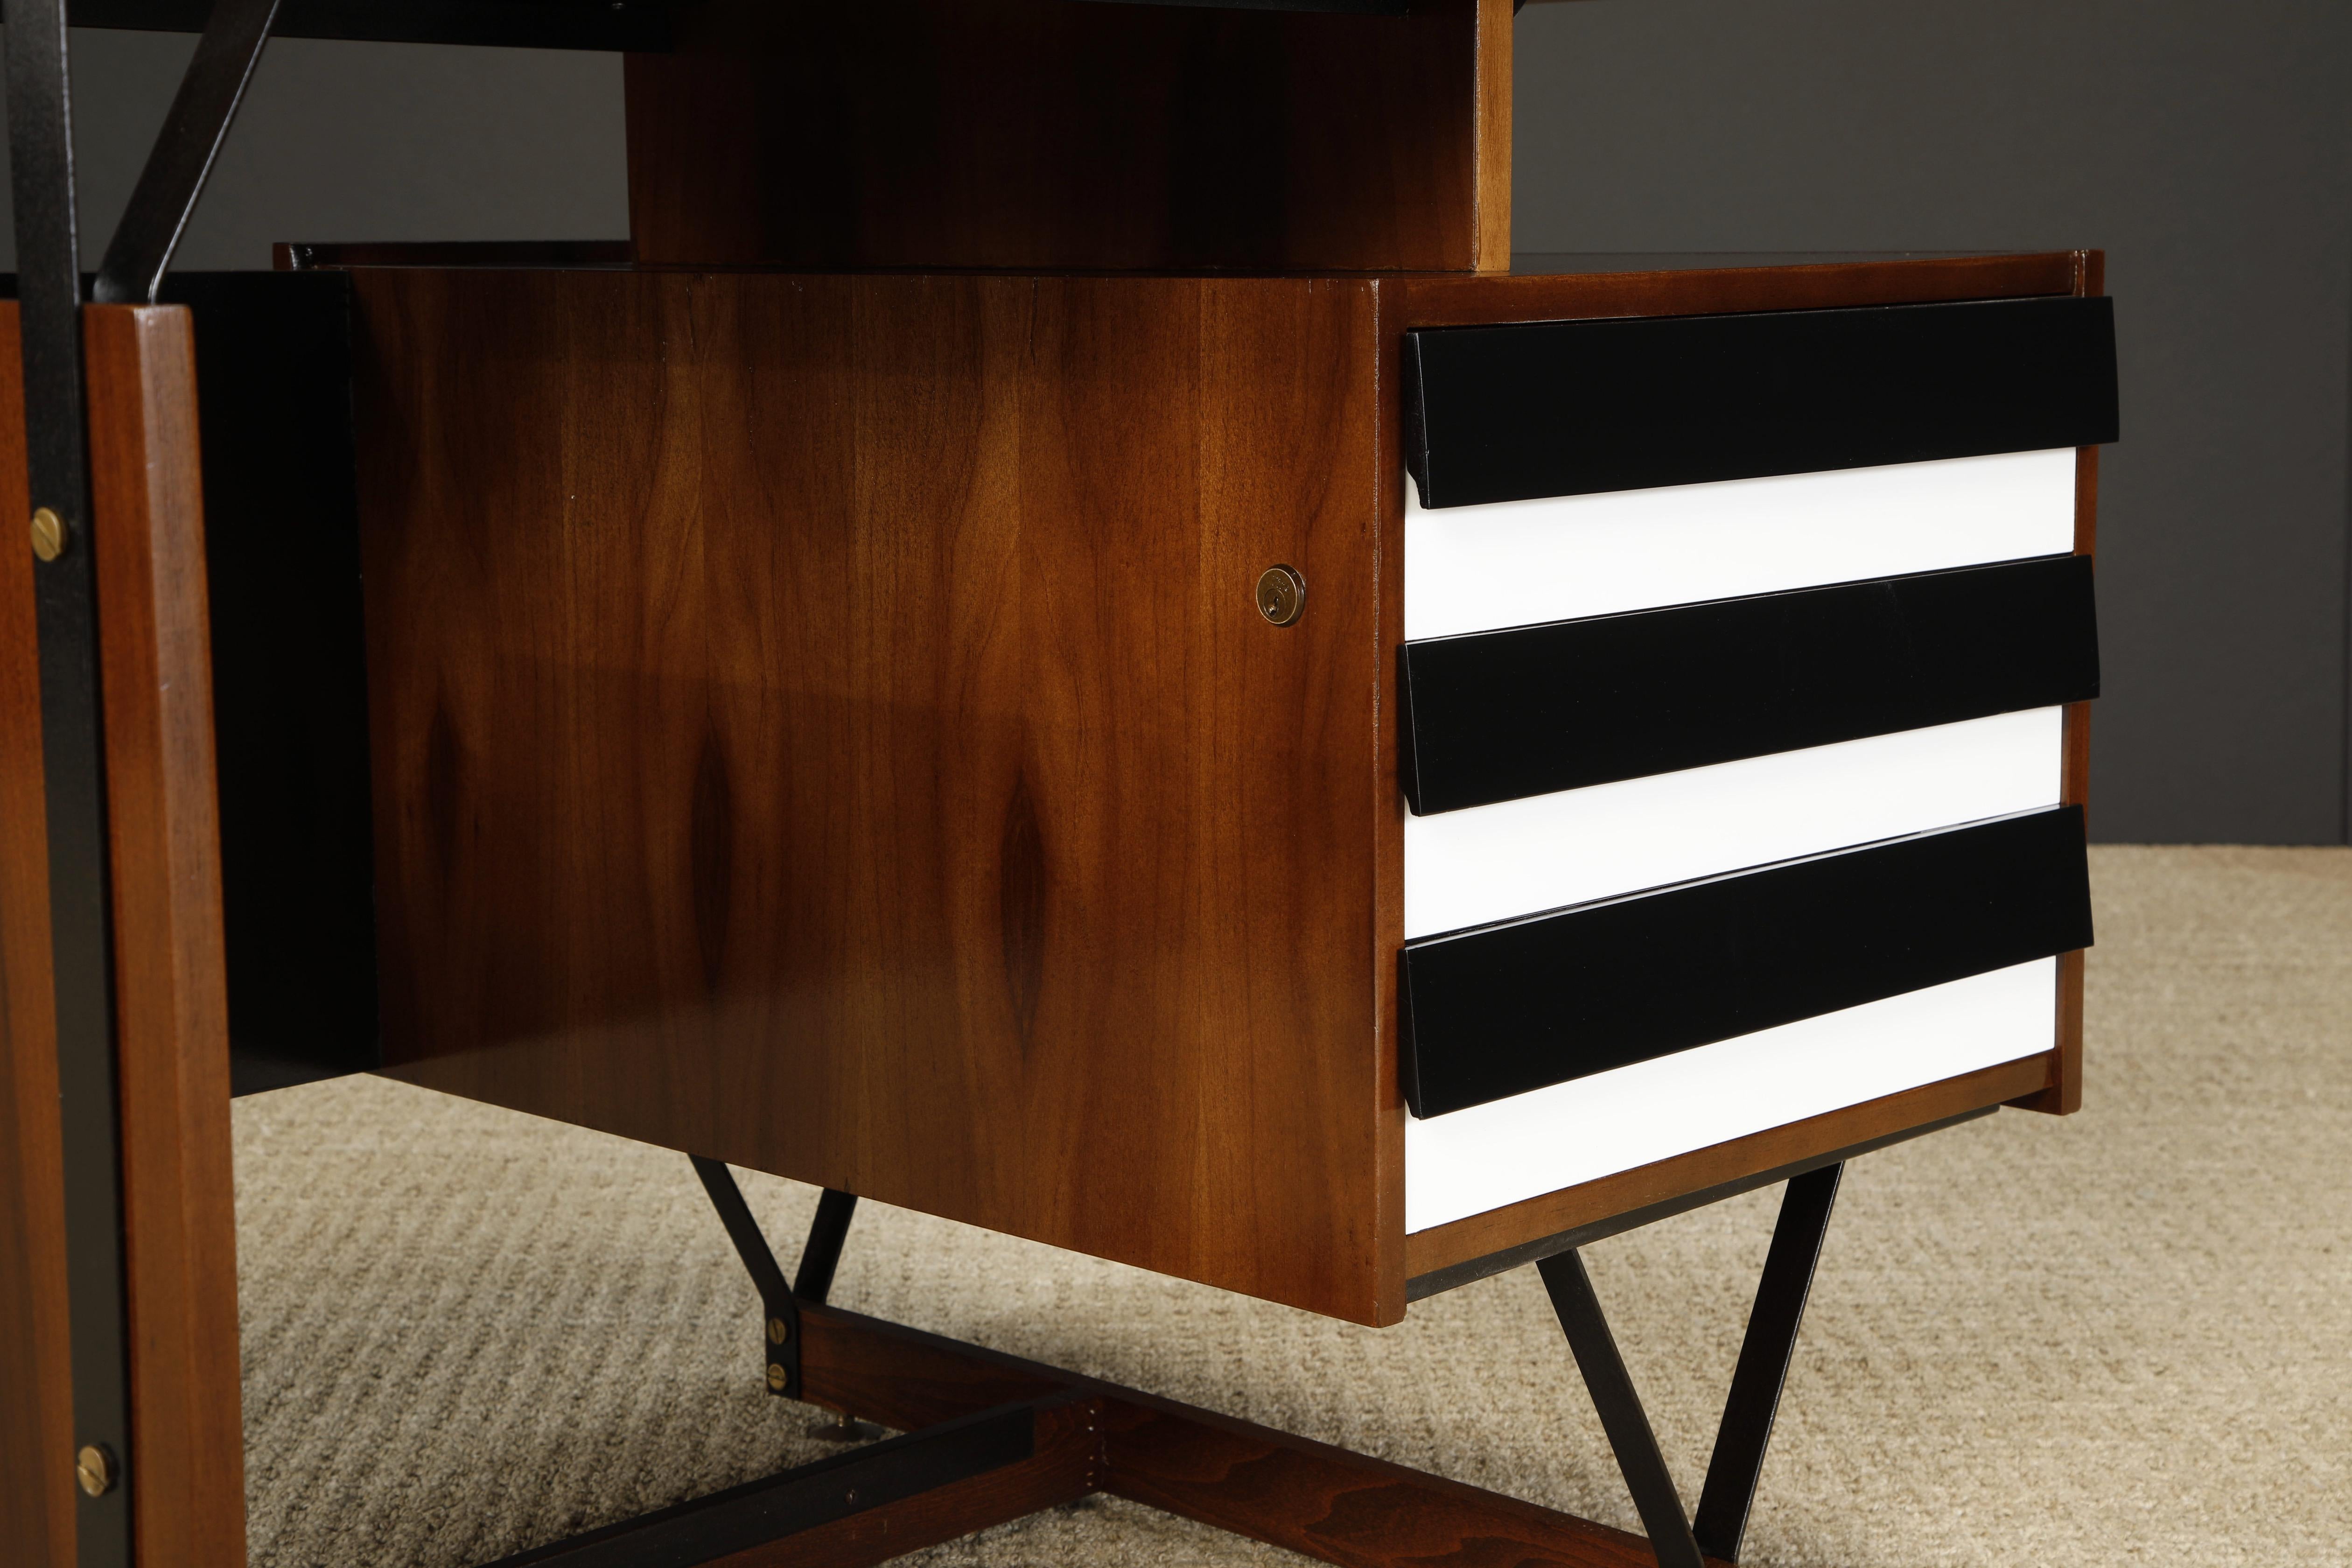 Italian Mid-Century Modern Desk, Style of Gio Ponti, c 1950s, Refinished For Sale 2